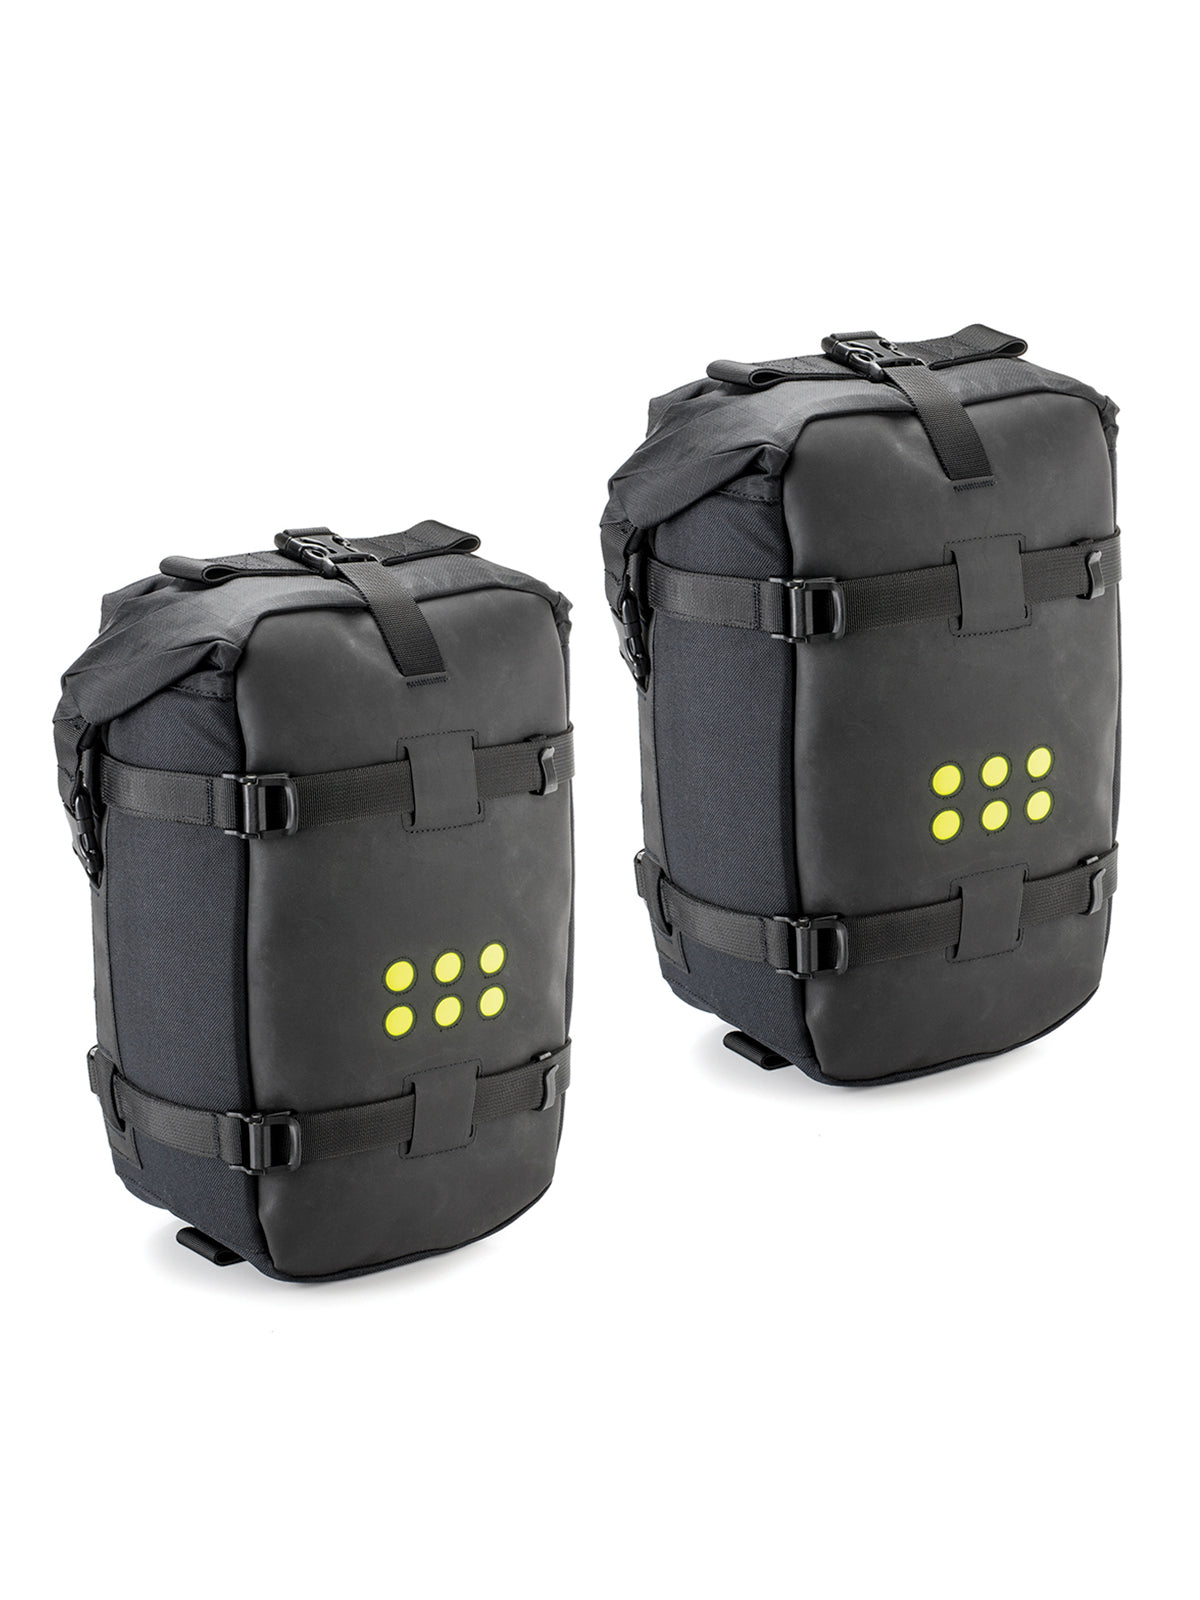 Two OS12 adventure packs